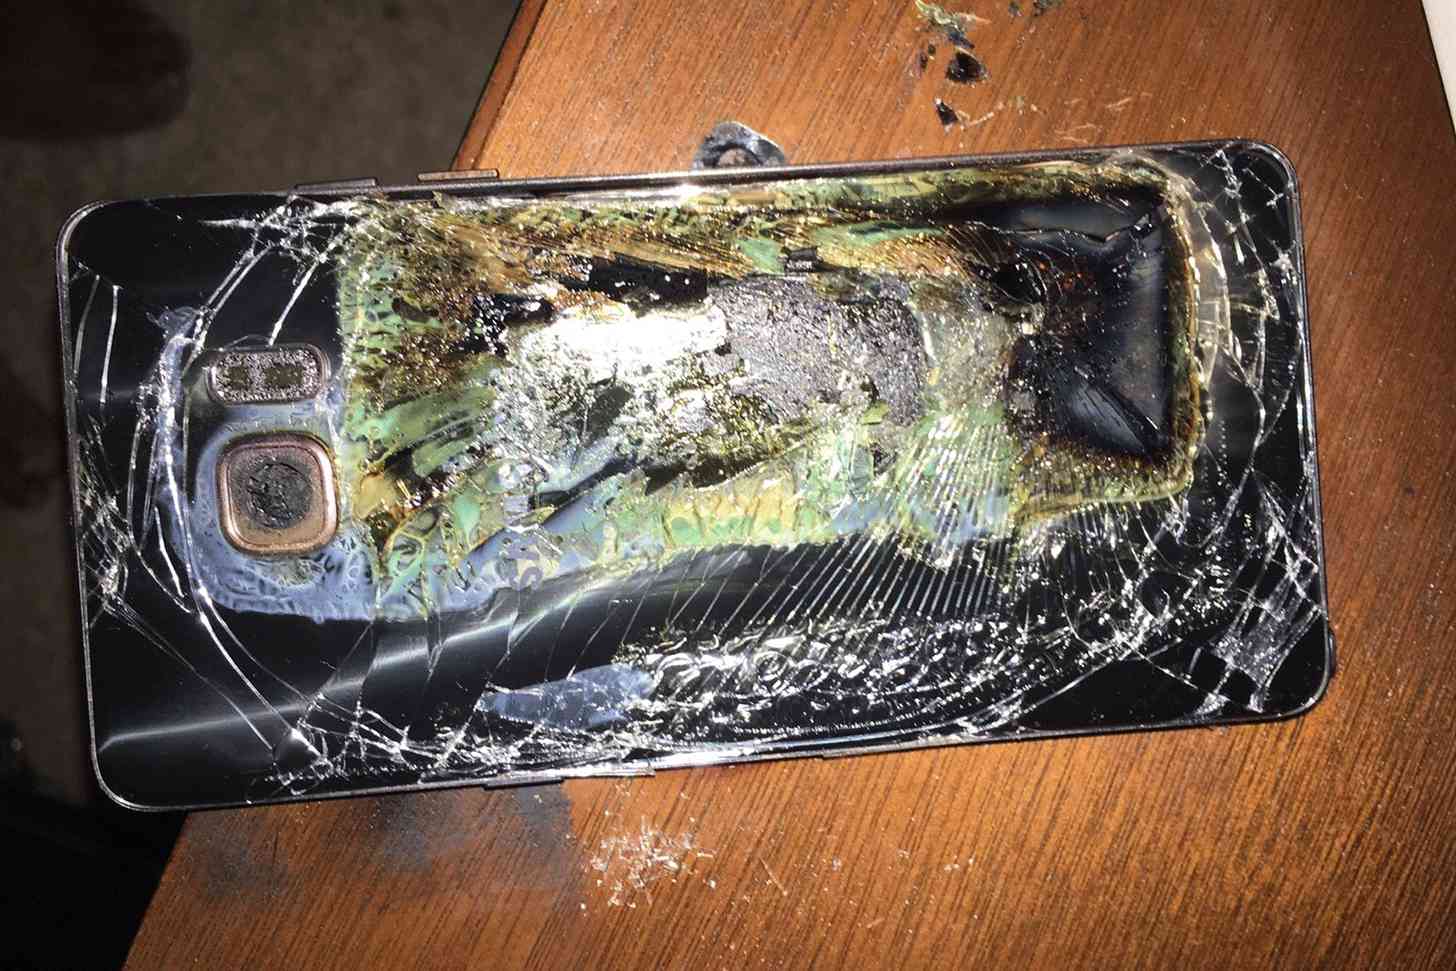 Fourth replacement Galaxy Note 7 catches fire